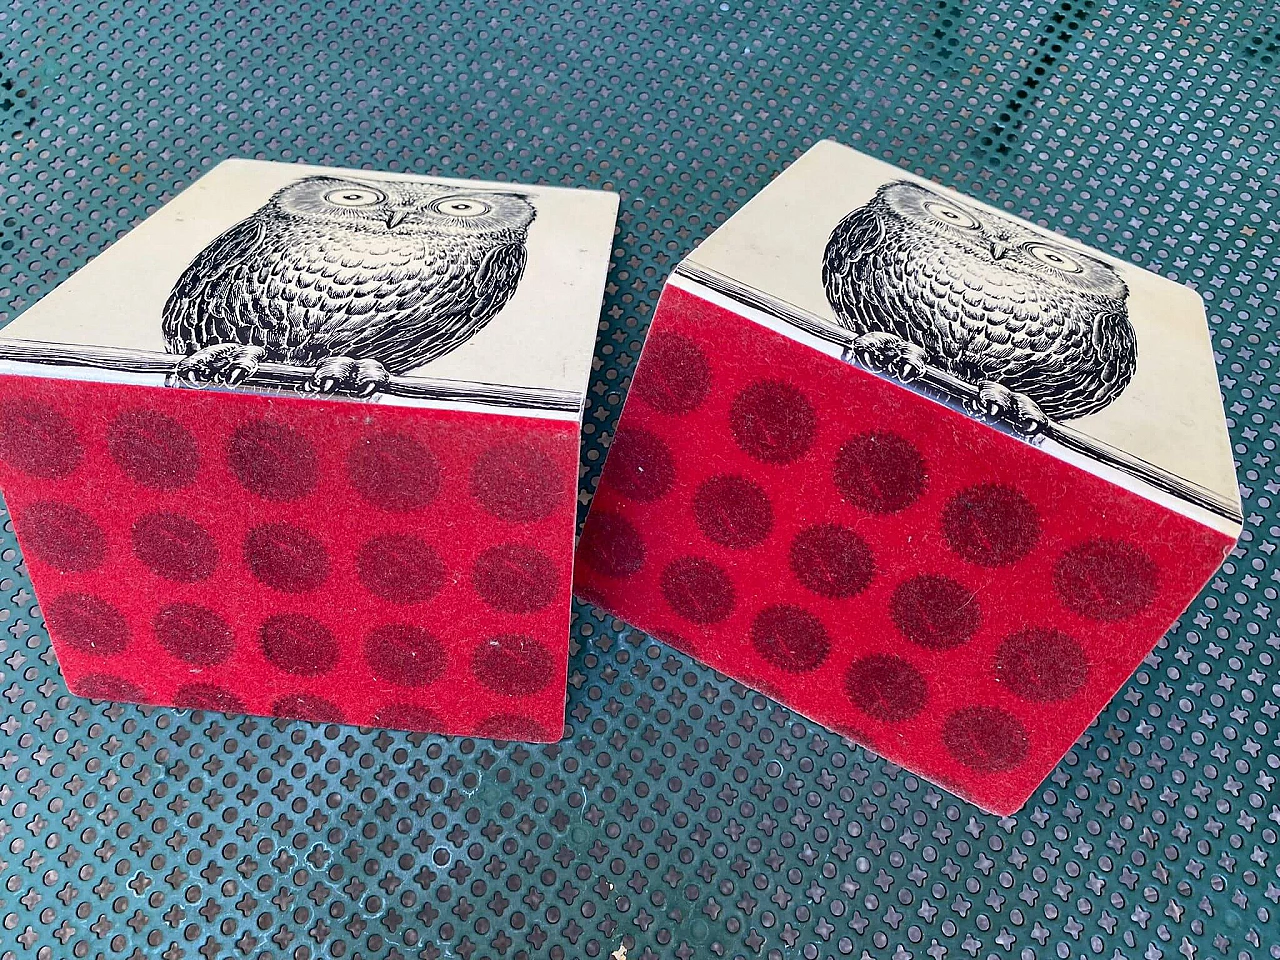 Pair of Owl bookends by Piero Fornasetti, 50s 1253861